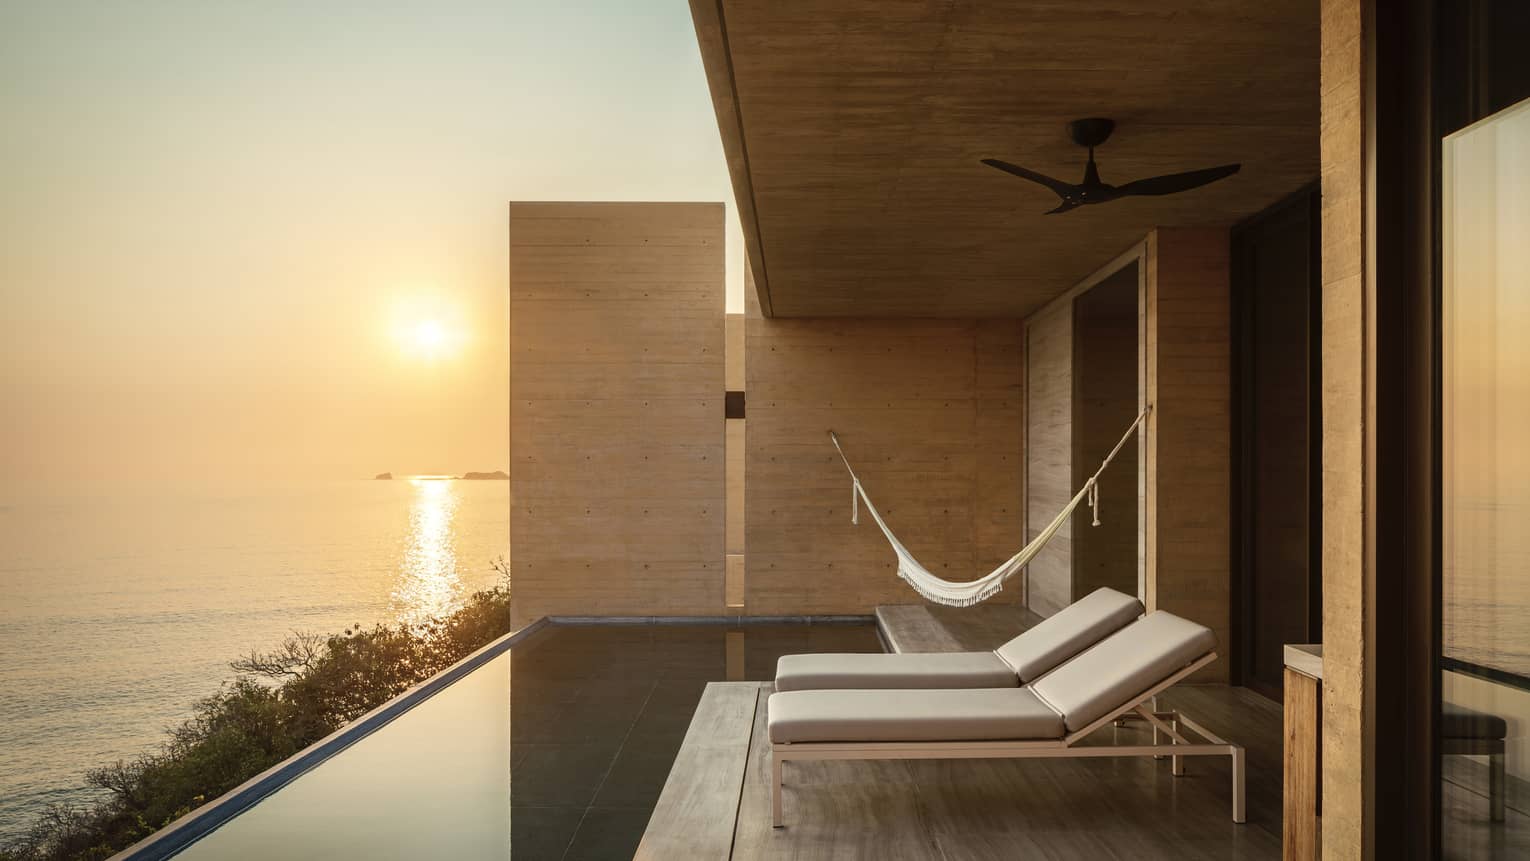 Poolside deck at sunset with lounge chairs, hammock and ocean views